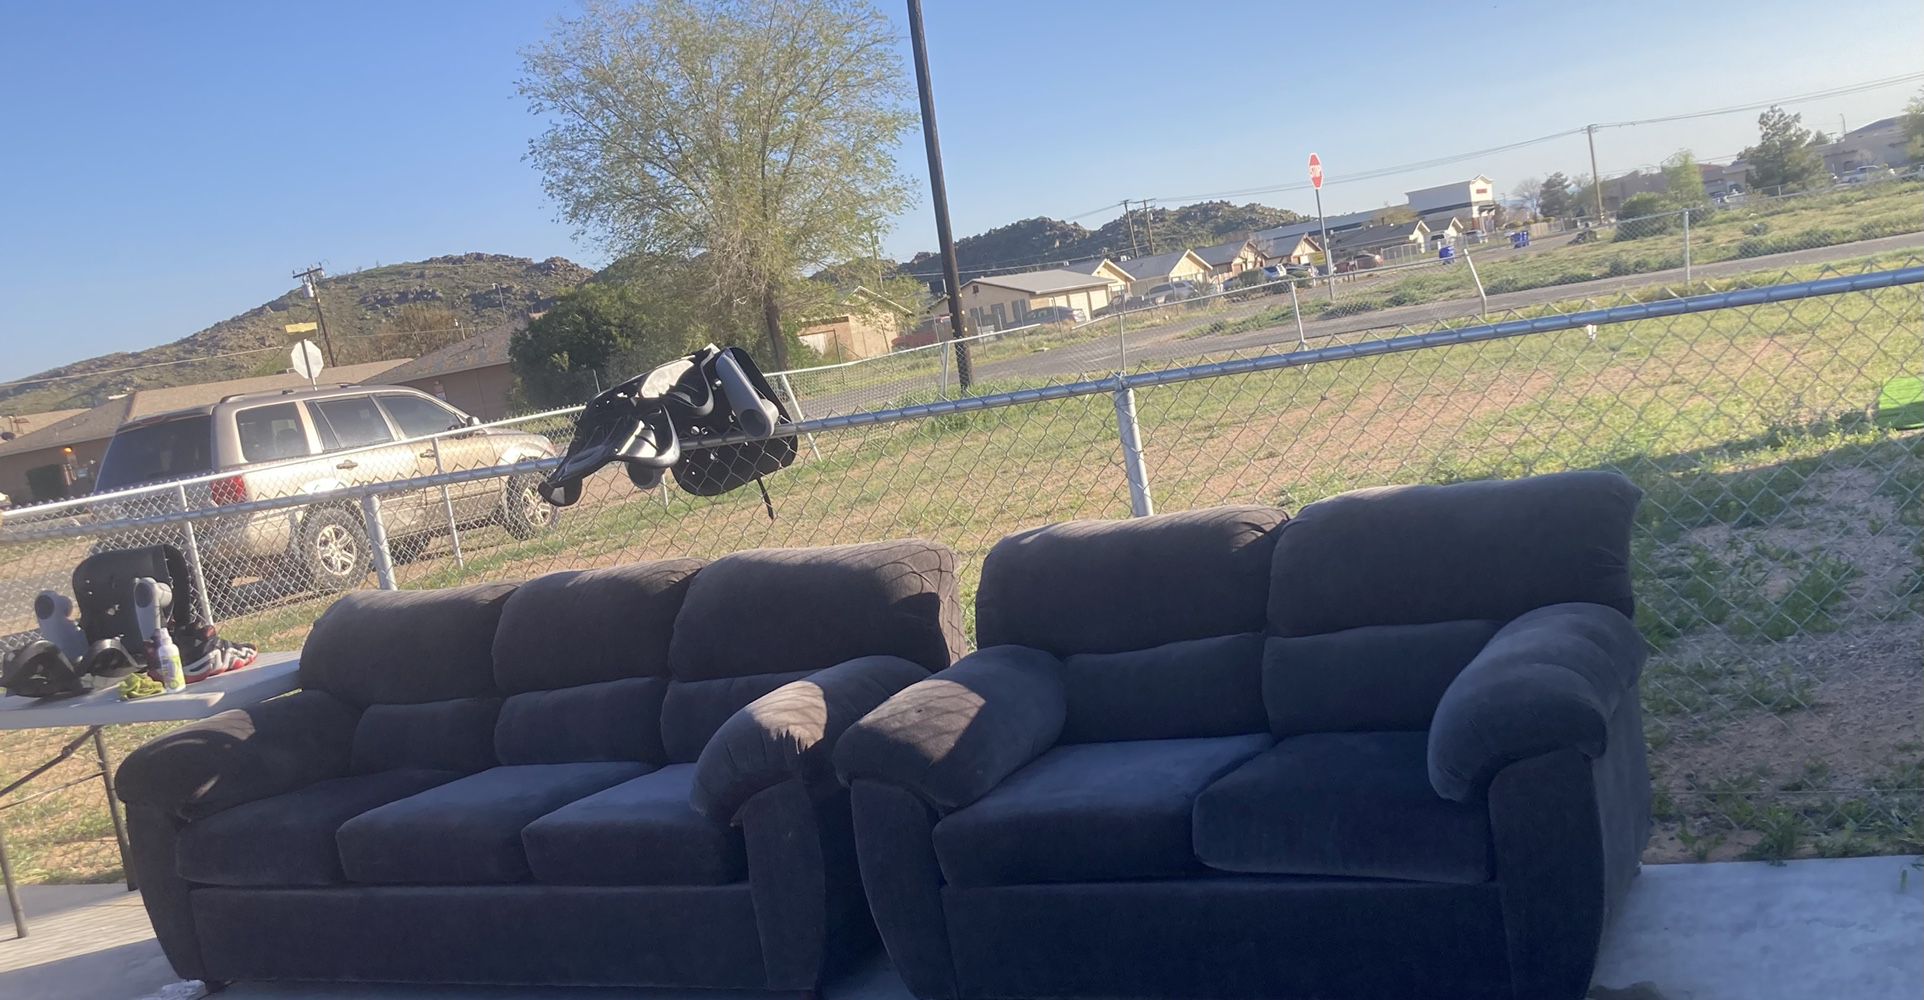 Couch Set $100